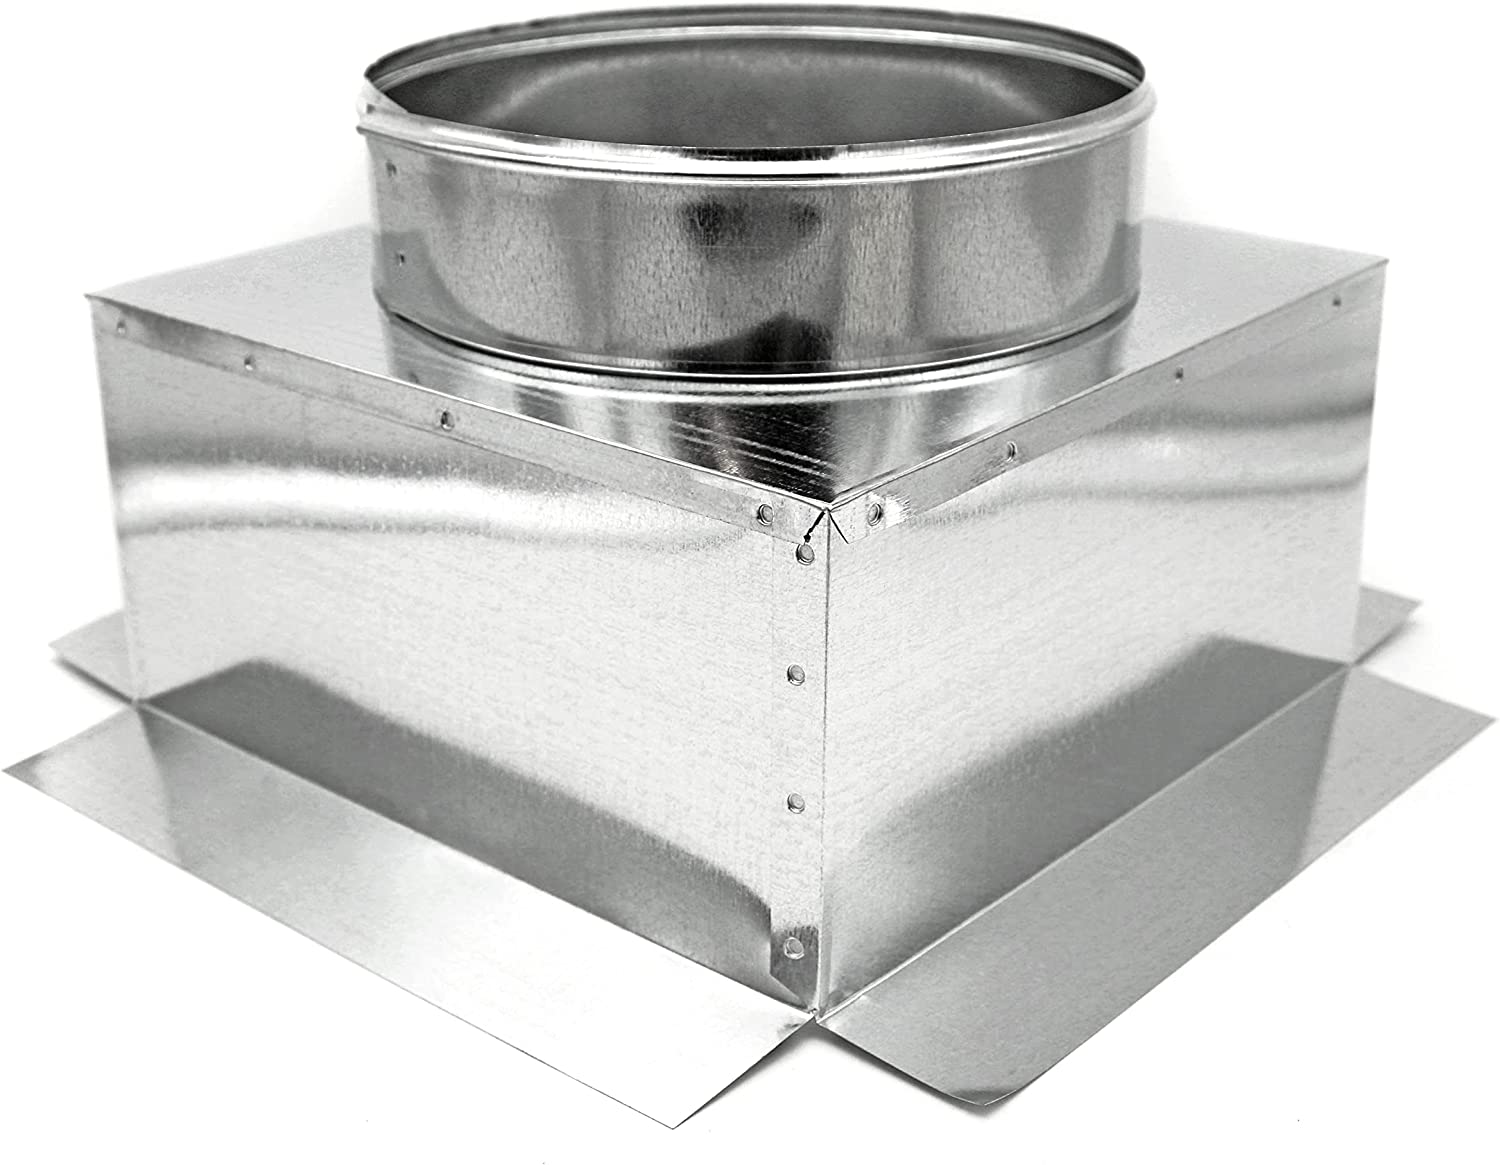 HVAC Plenum Ceiling Box | Top Ceiling Box | 12" X 12" X 8" Galvanized Steel Metal Ceiling Box is Compatible with Duct 8"